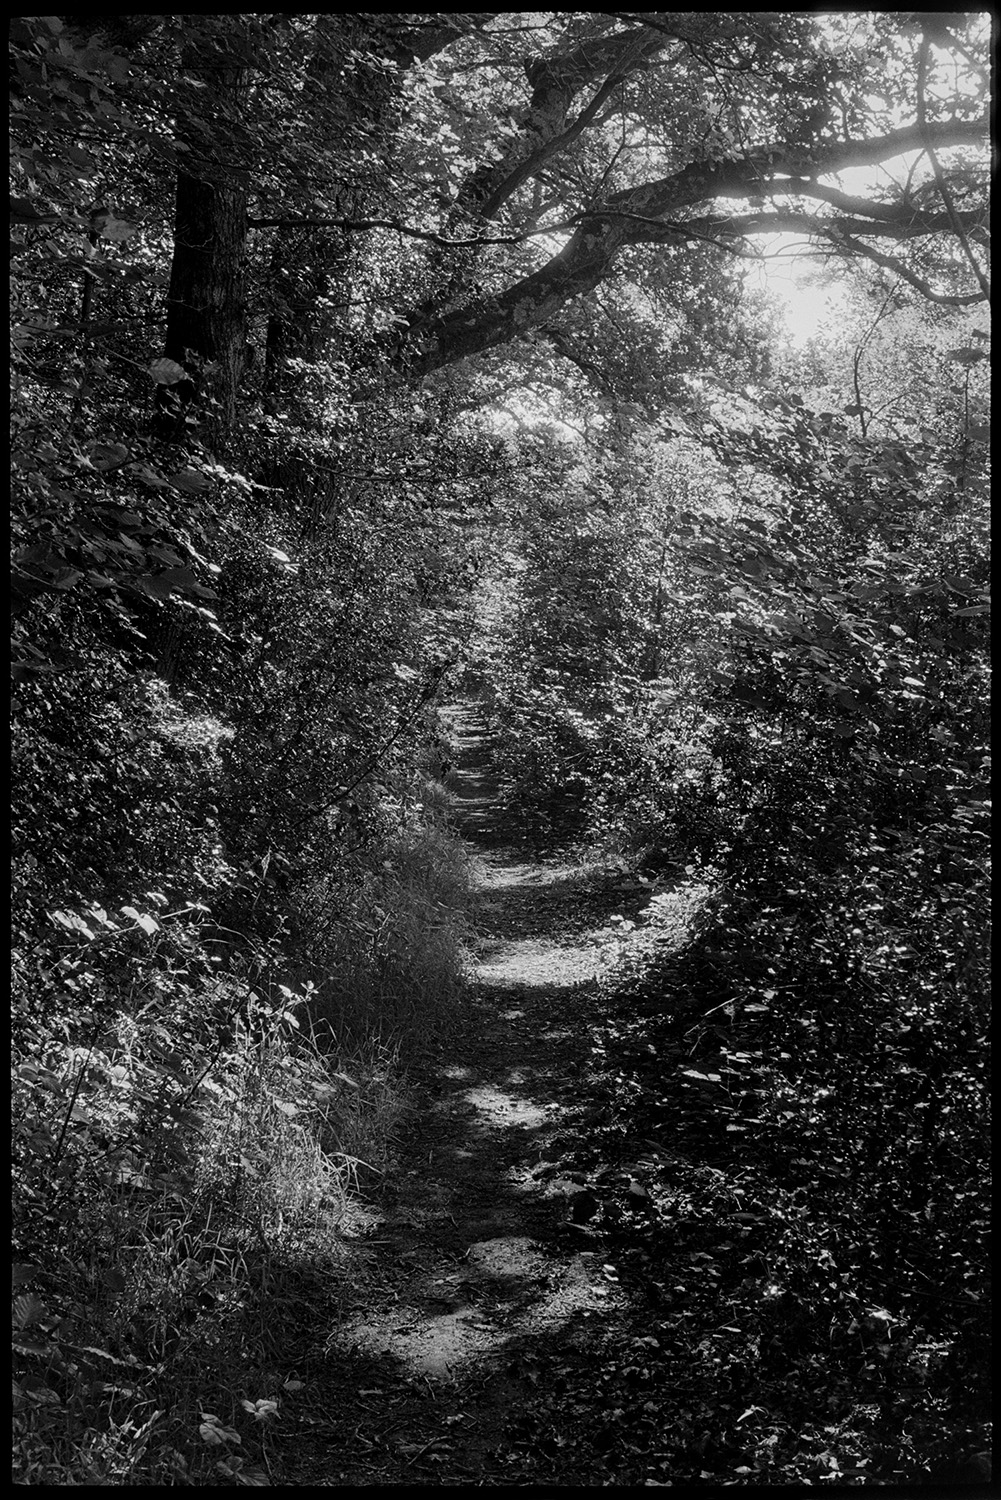 Dark trees with path and shadows. 
[A footpath overshadowed by trees near Budd Mill, Millhams, Dolton.]